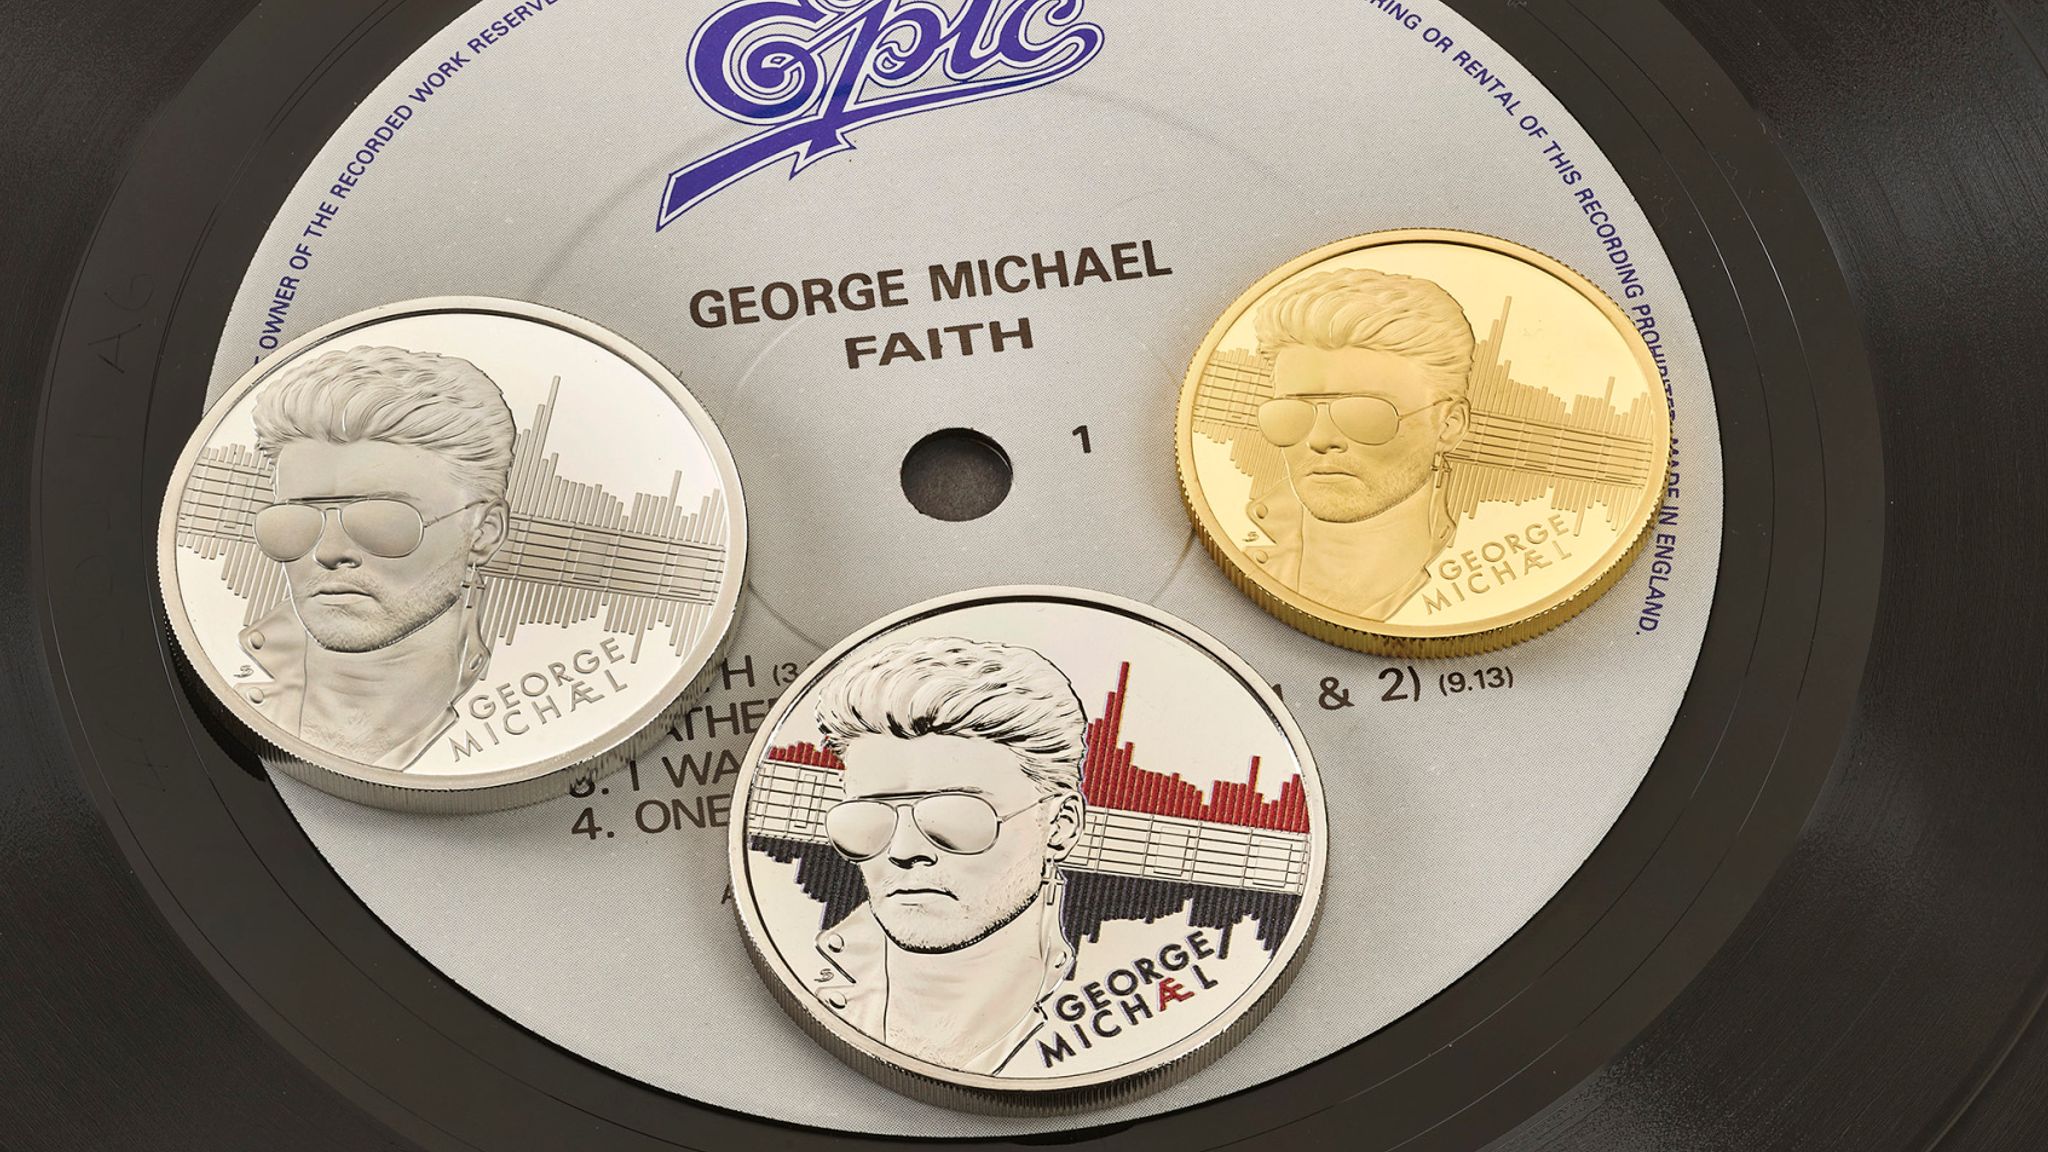 George Michael honoured with brand new collectable coins | Ents & Arts News  | Sky News